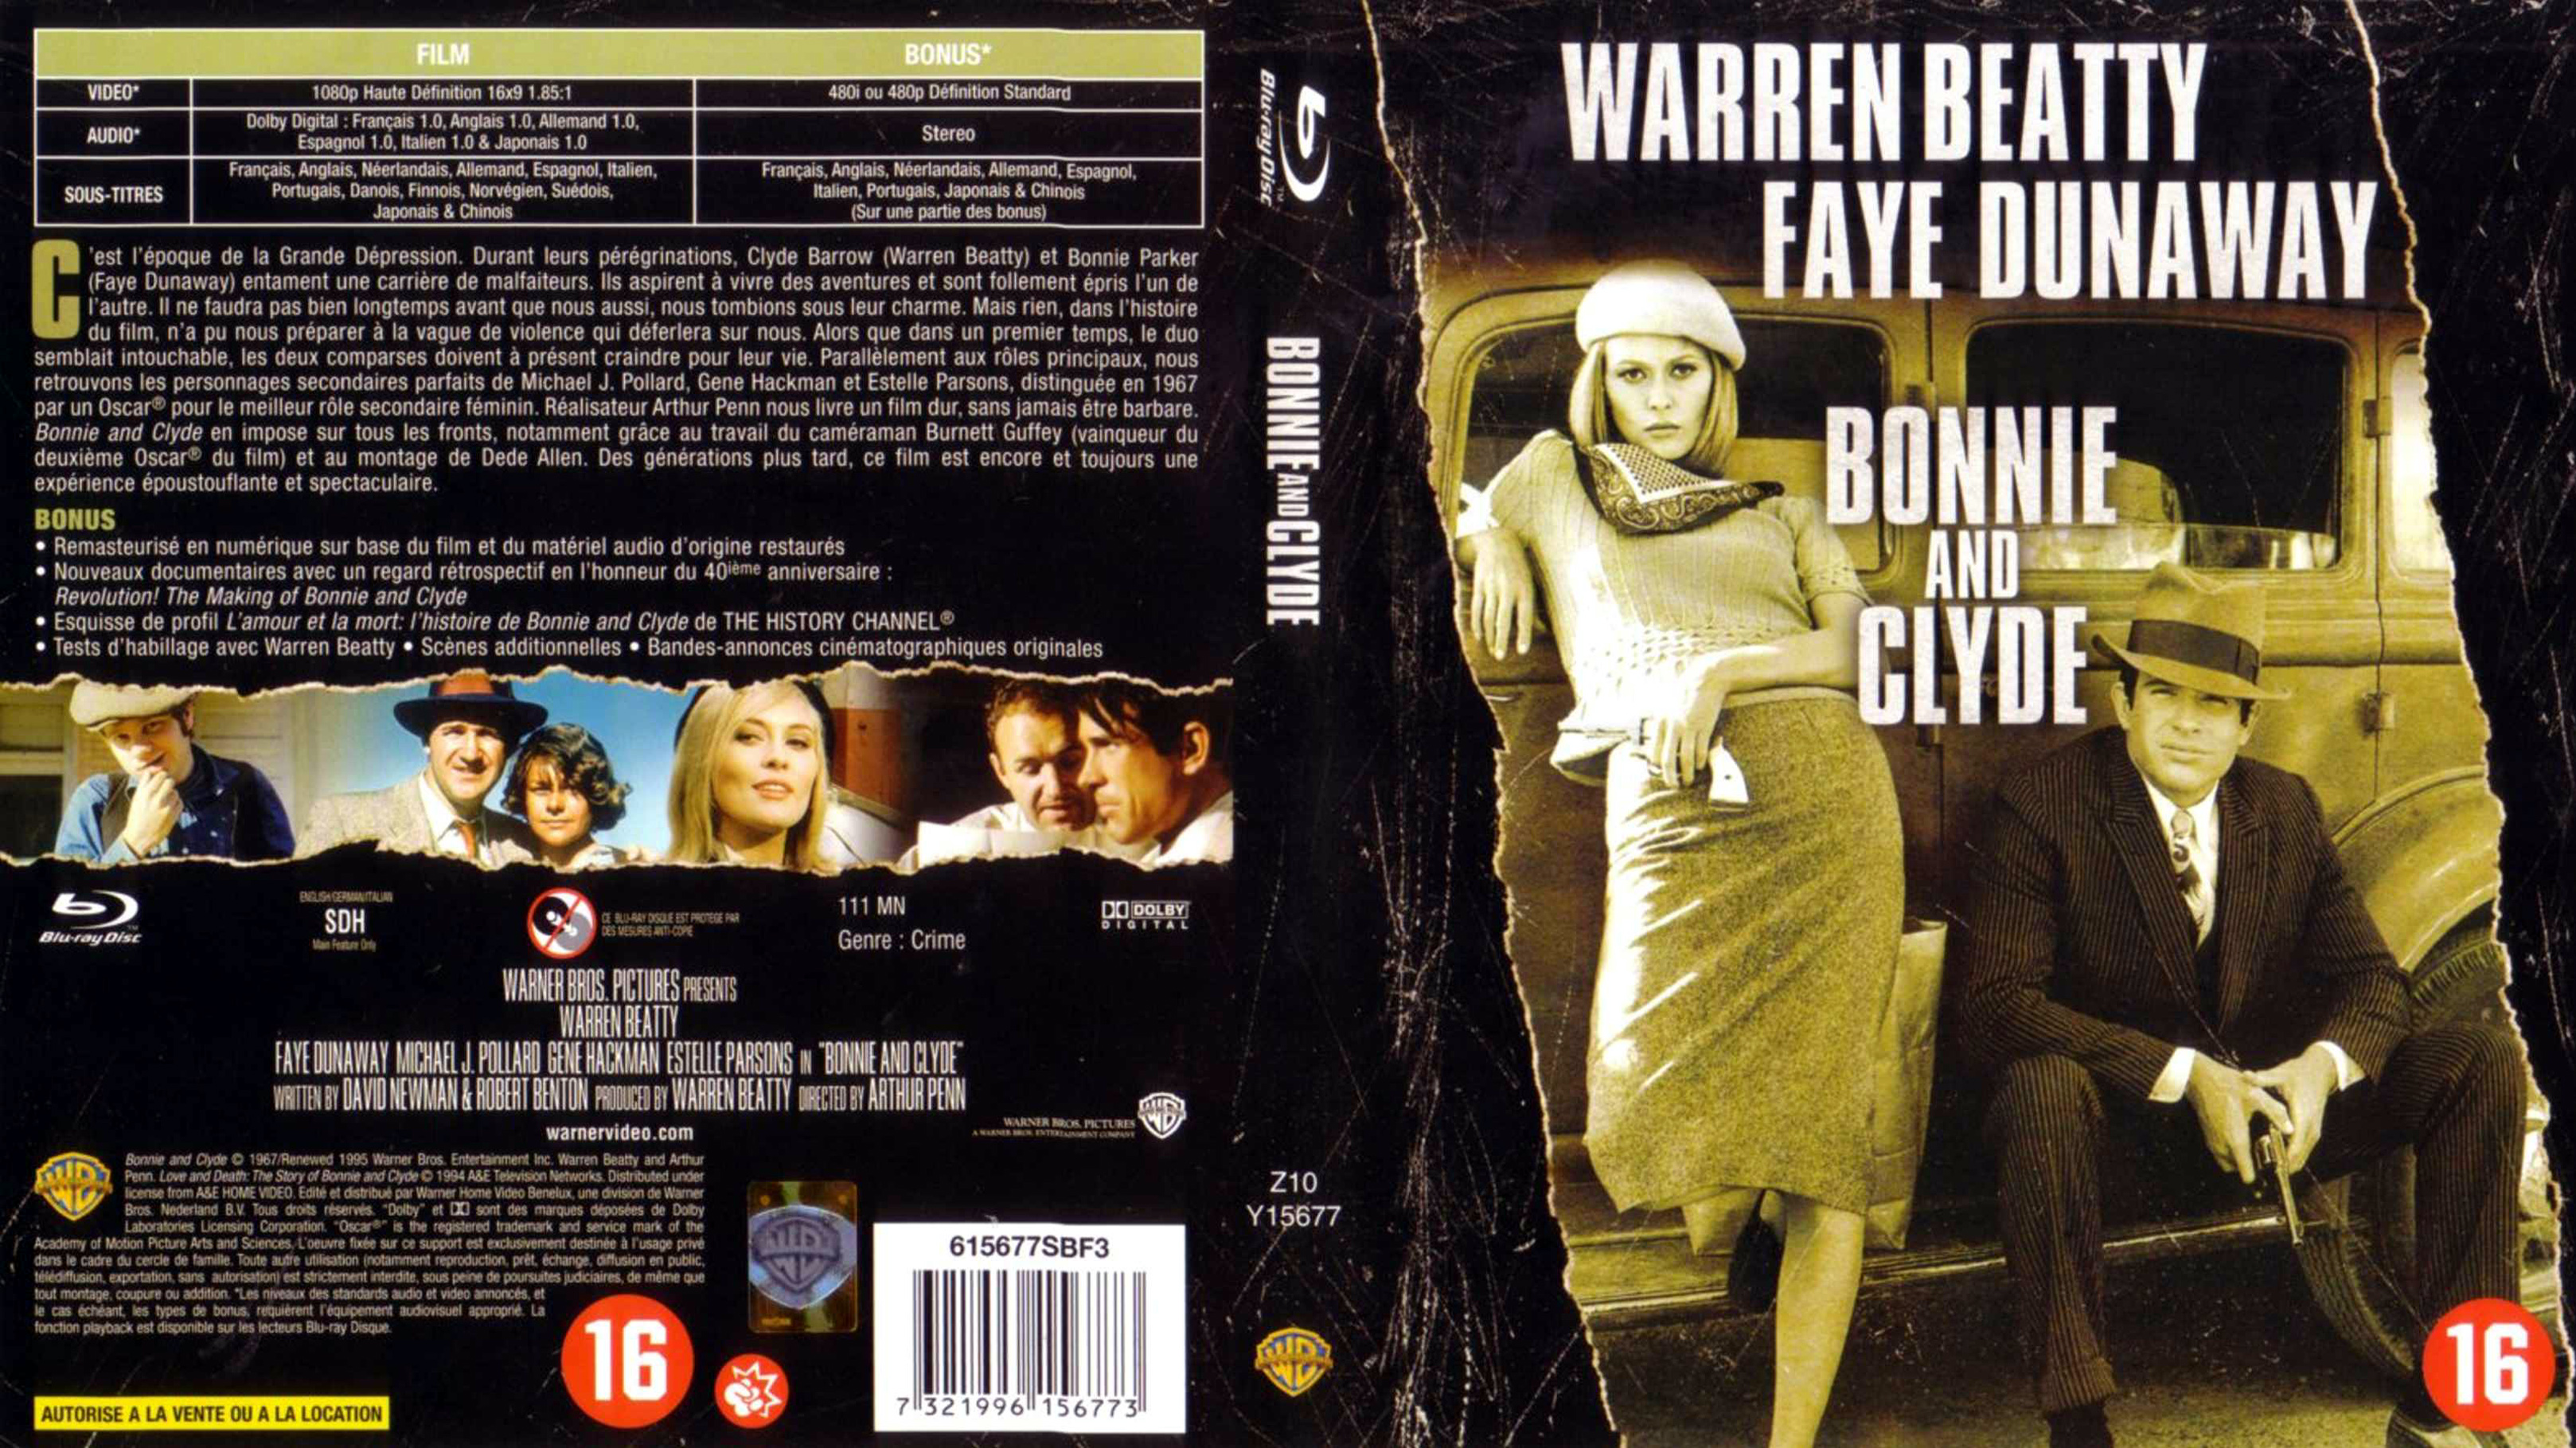 Jaquette DVD Bonnie and Clyde (BLU-RAY)